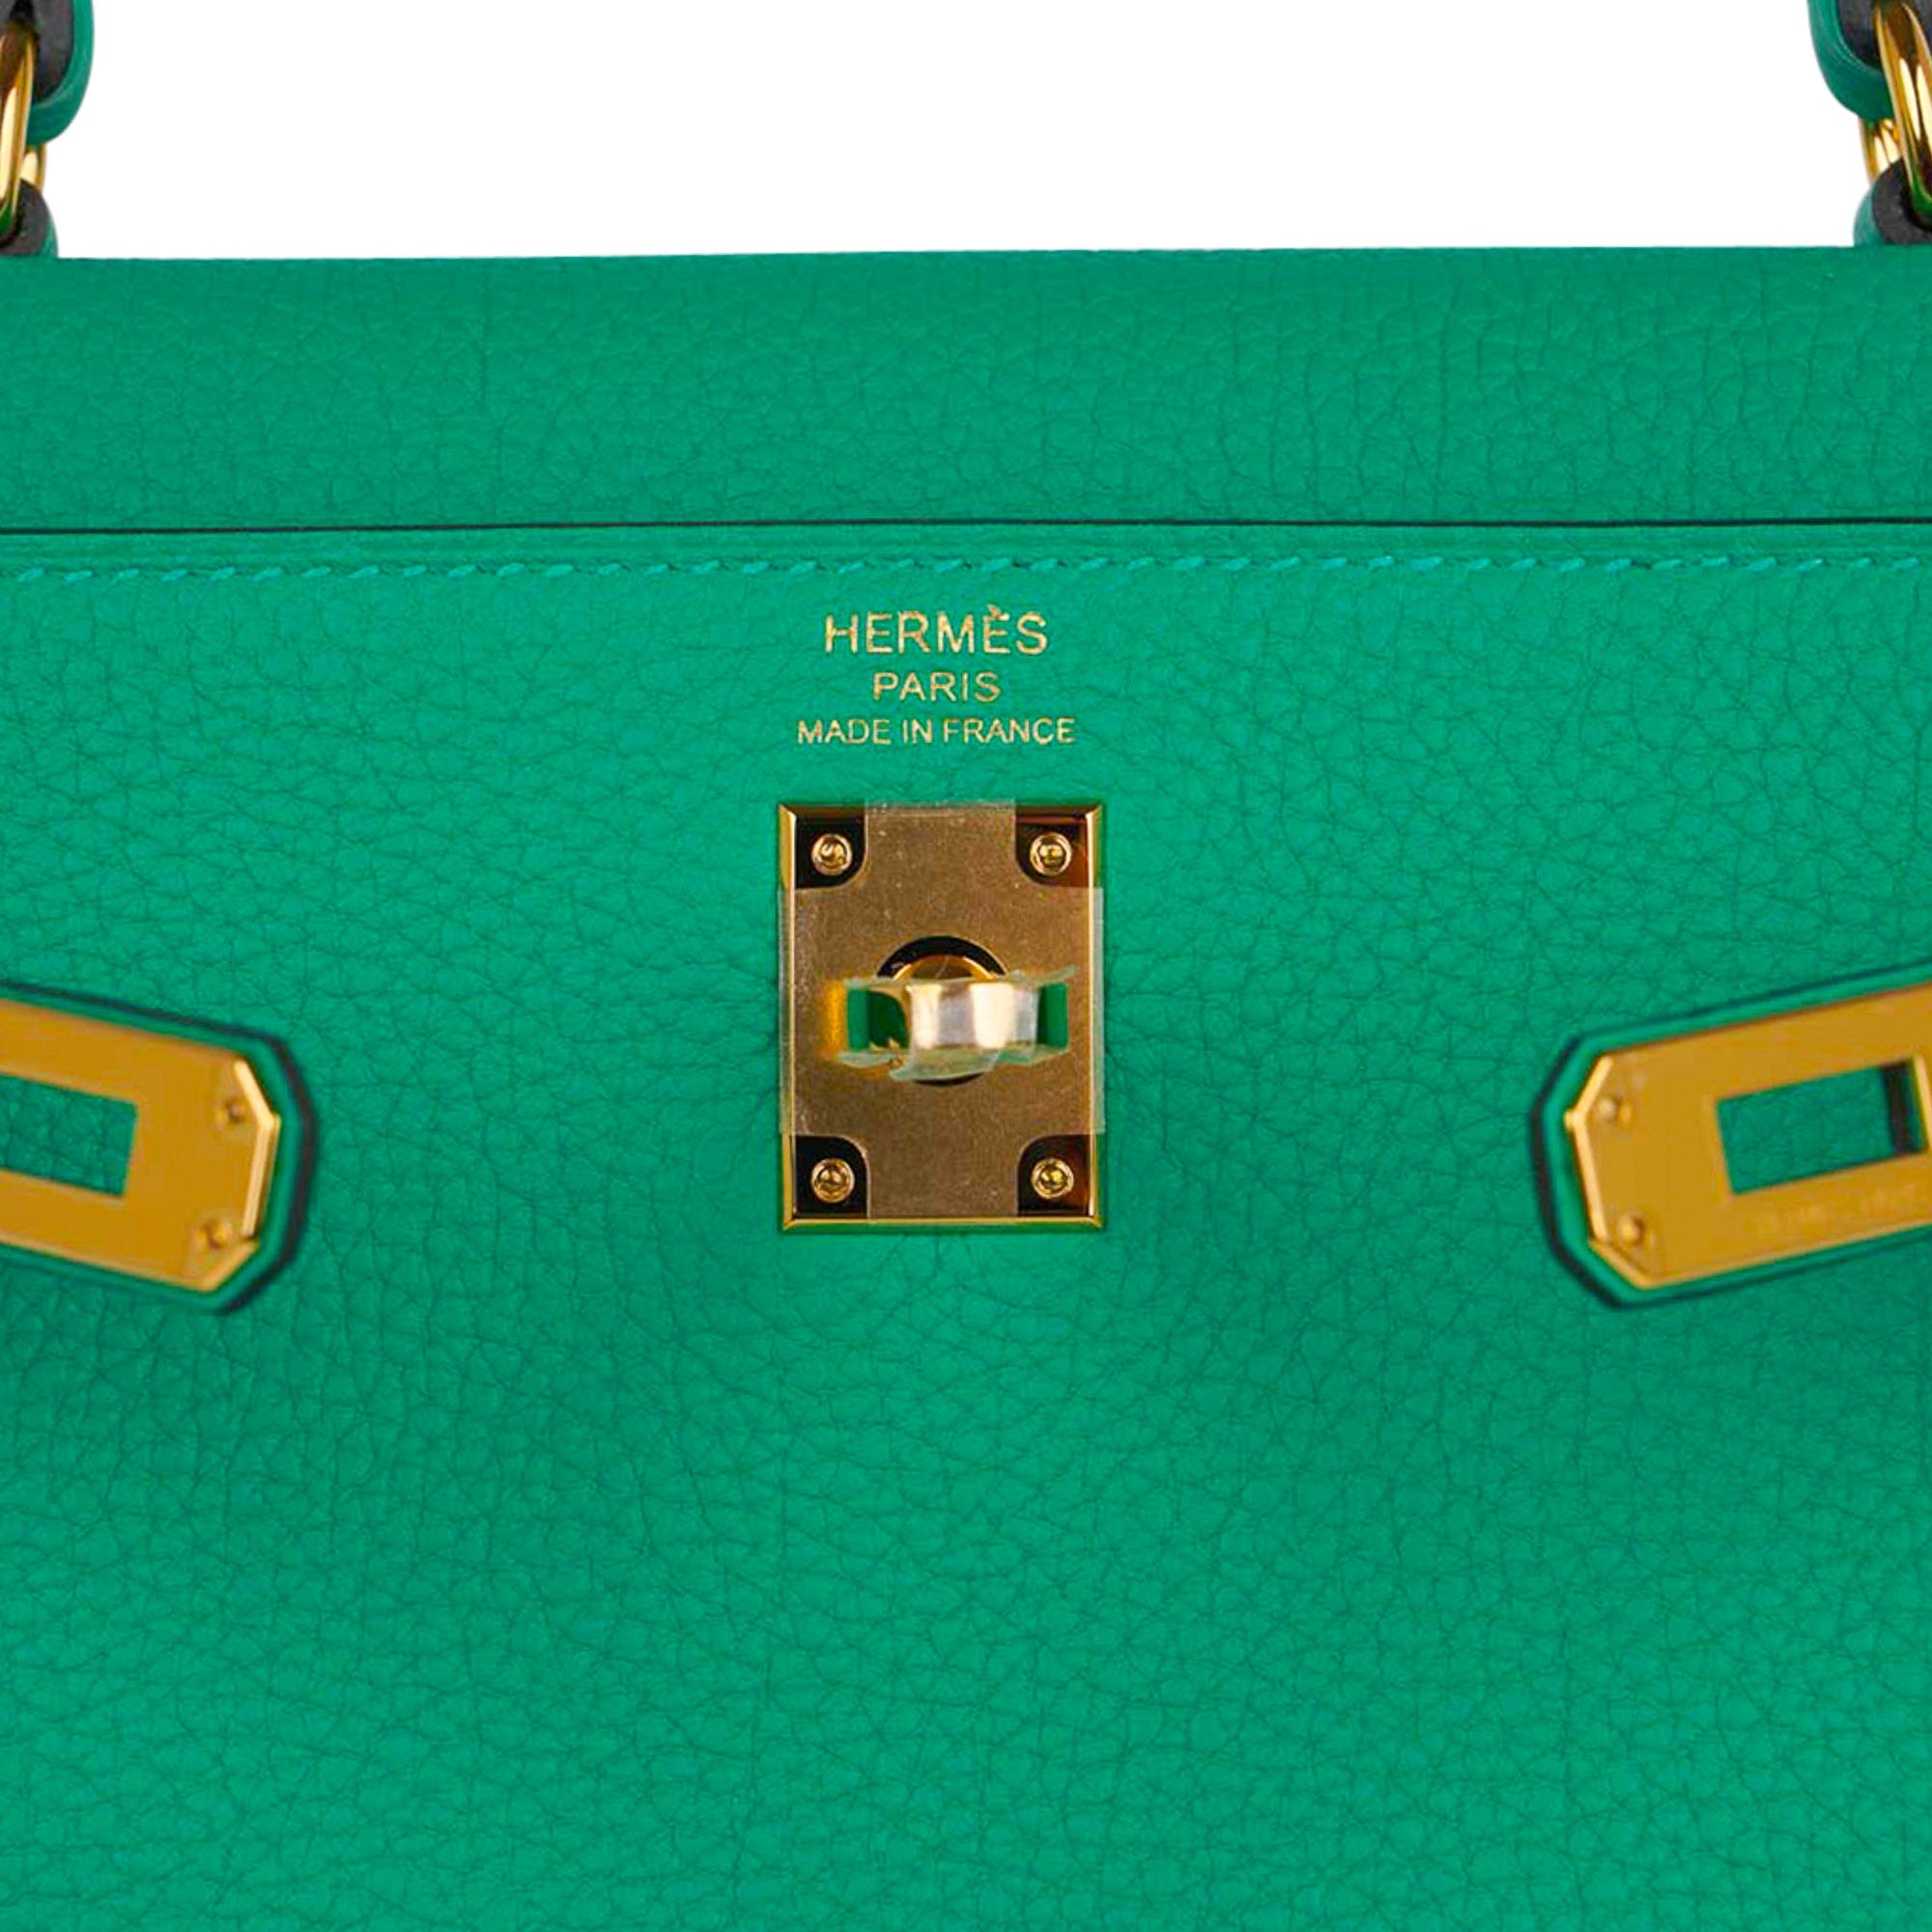 Hermes Karo pouch in GM size-color Menthe. Such a great cosmetics holder  for your handbag.